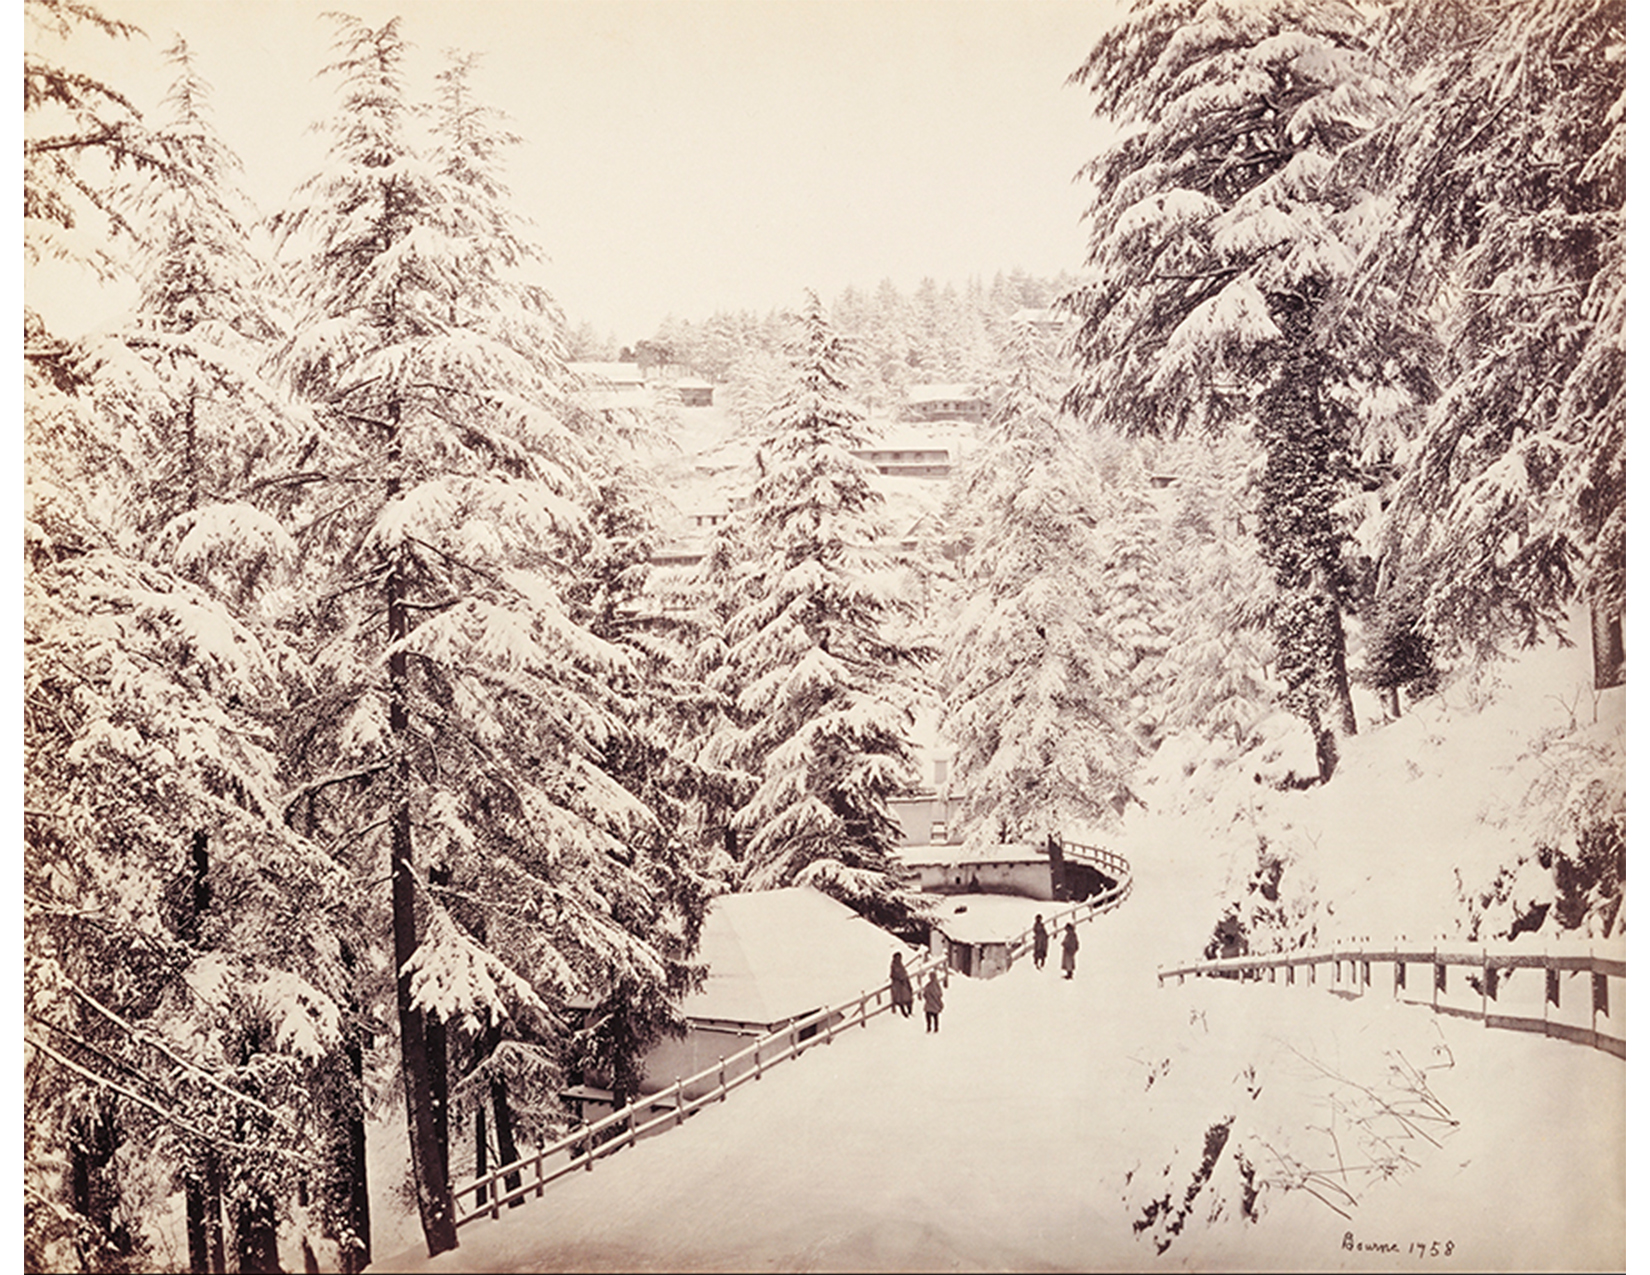 black and white image of four people walking on a snowy path lined with trees. in the background, a mountainside with buildings on it